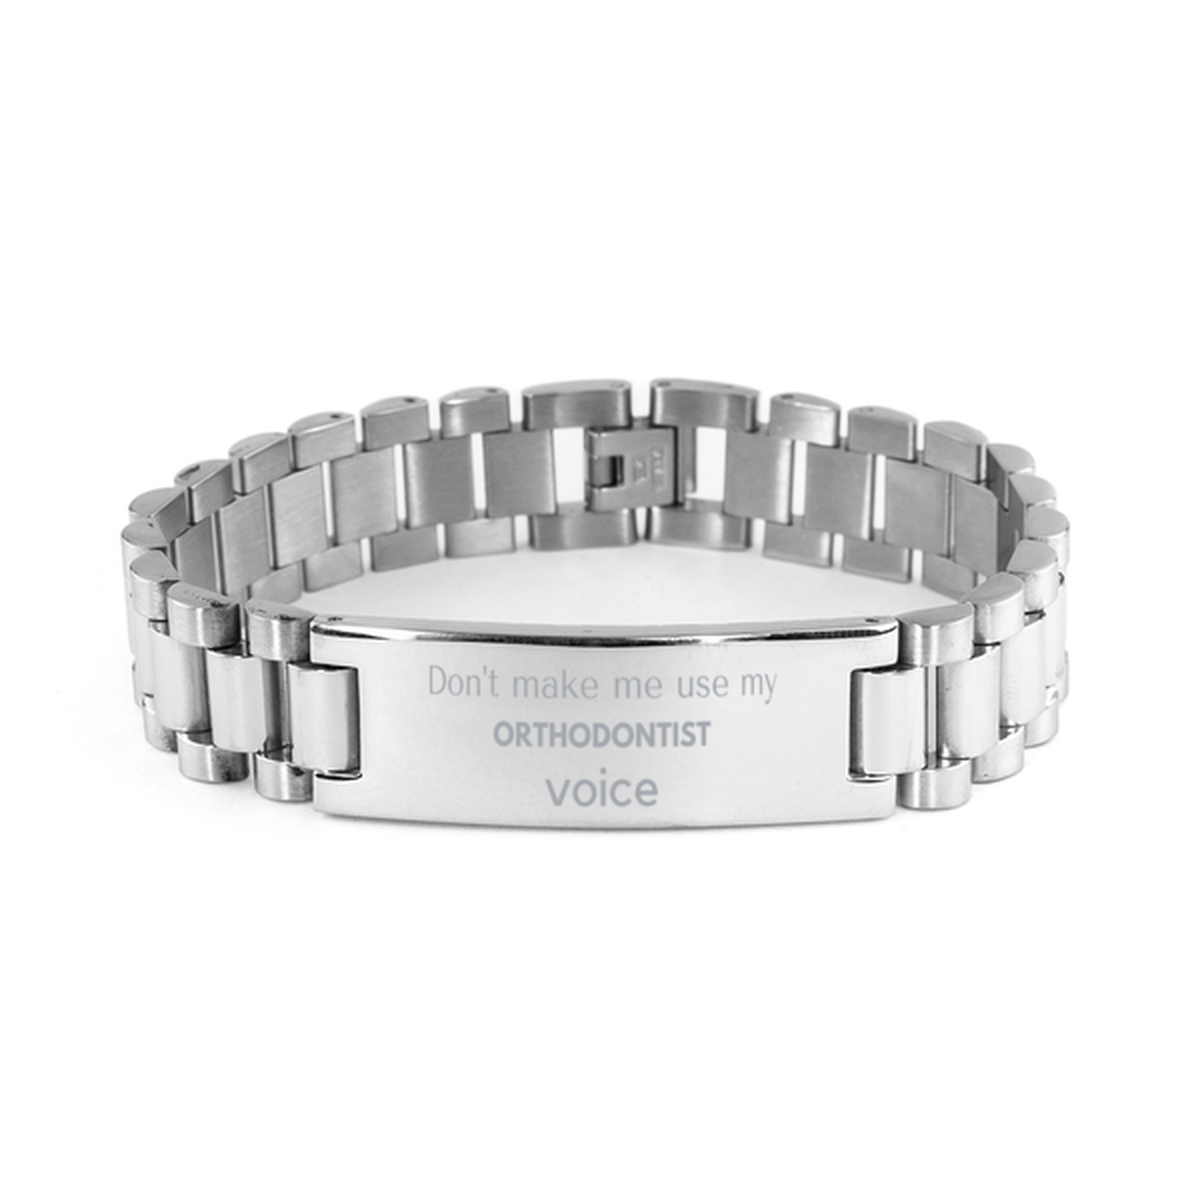 Don't make me use my Orthodontist voice, Sarcasm Orthodontist Gifts, Christmas Orthodontist Ladder Stainless Steel Bracelet Birthday Unique Gifts For Orthodontist Coworkers, Men, Women, Colleague, Friends